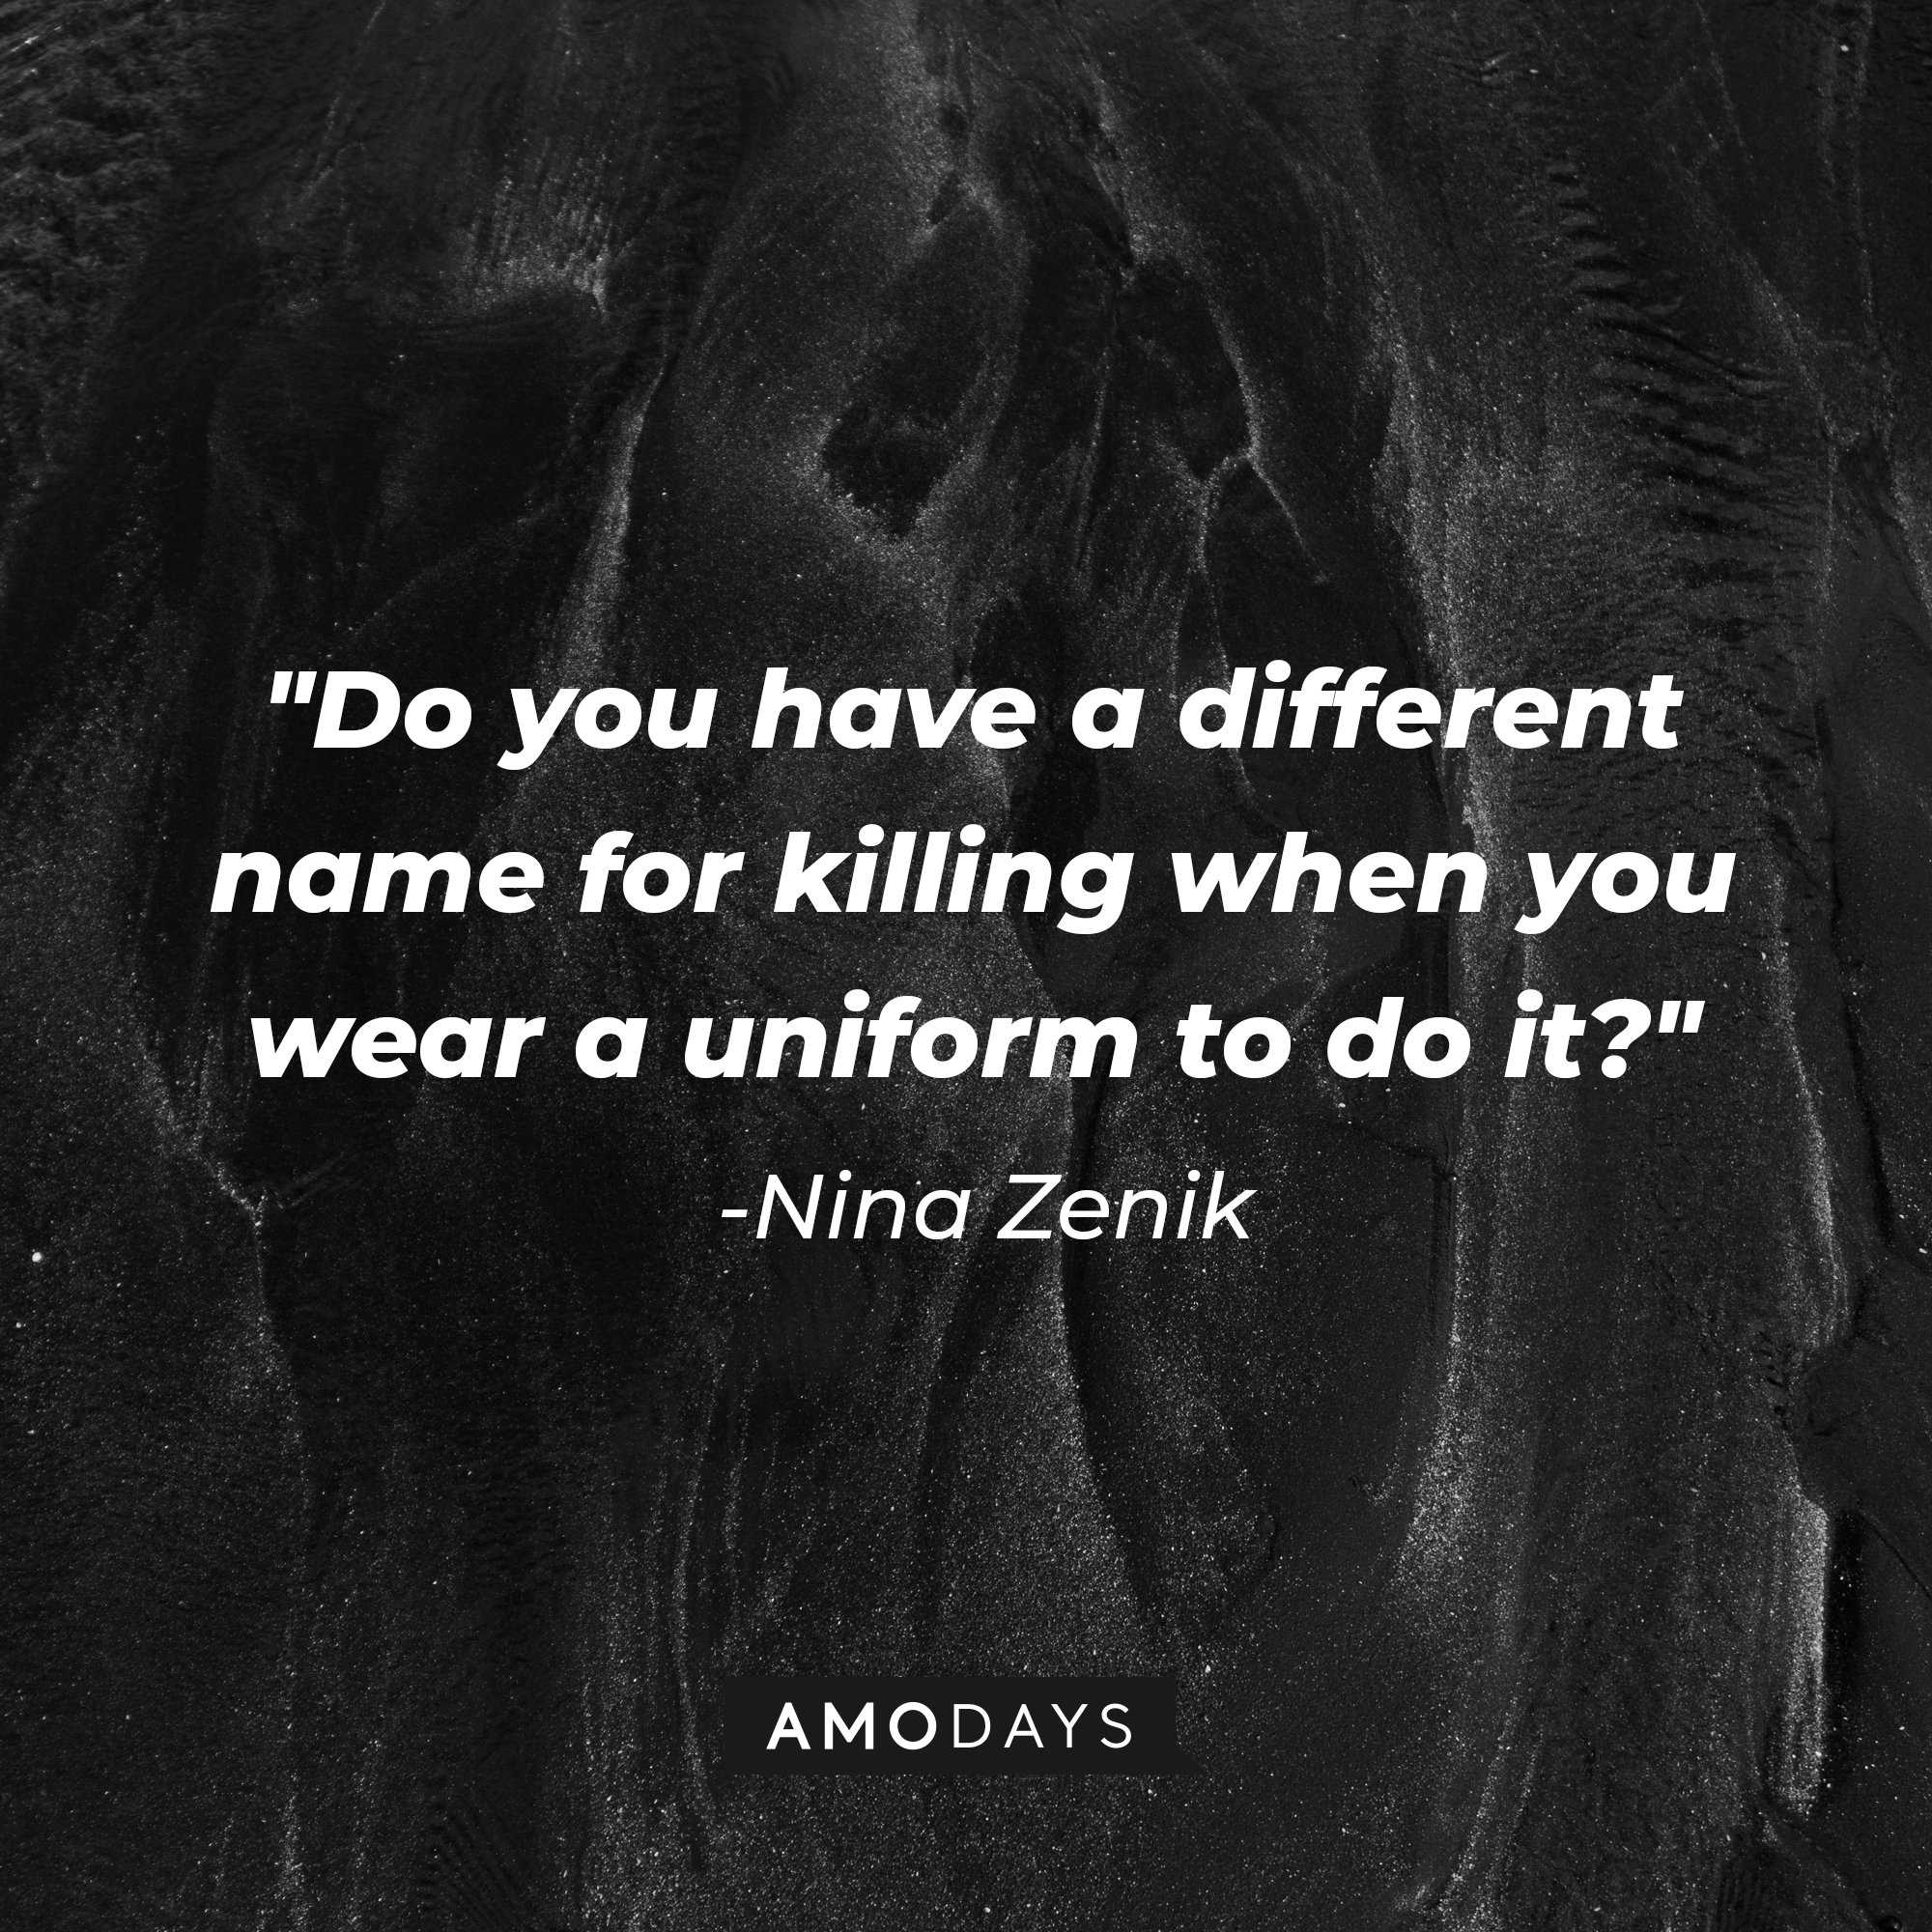  Nina Zenik’s quote: "Do you have a different name for killing when you wear a uniform to do it?" | Image: AmoDays